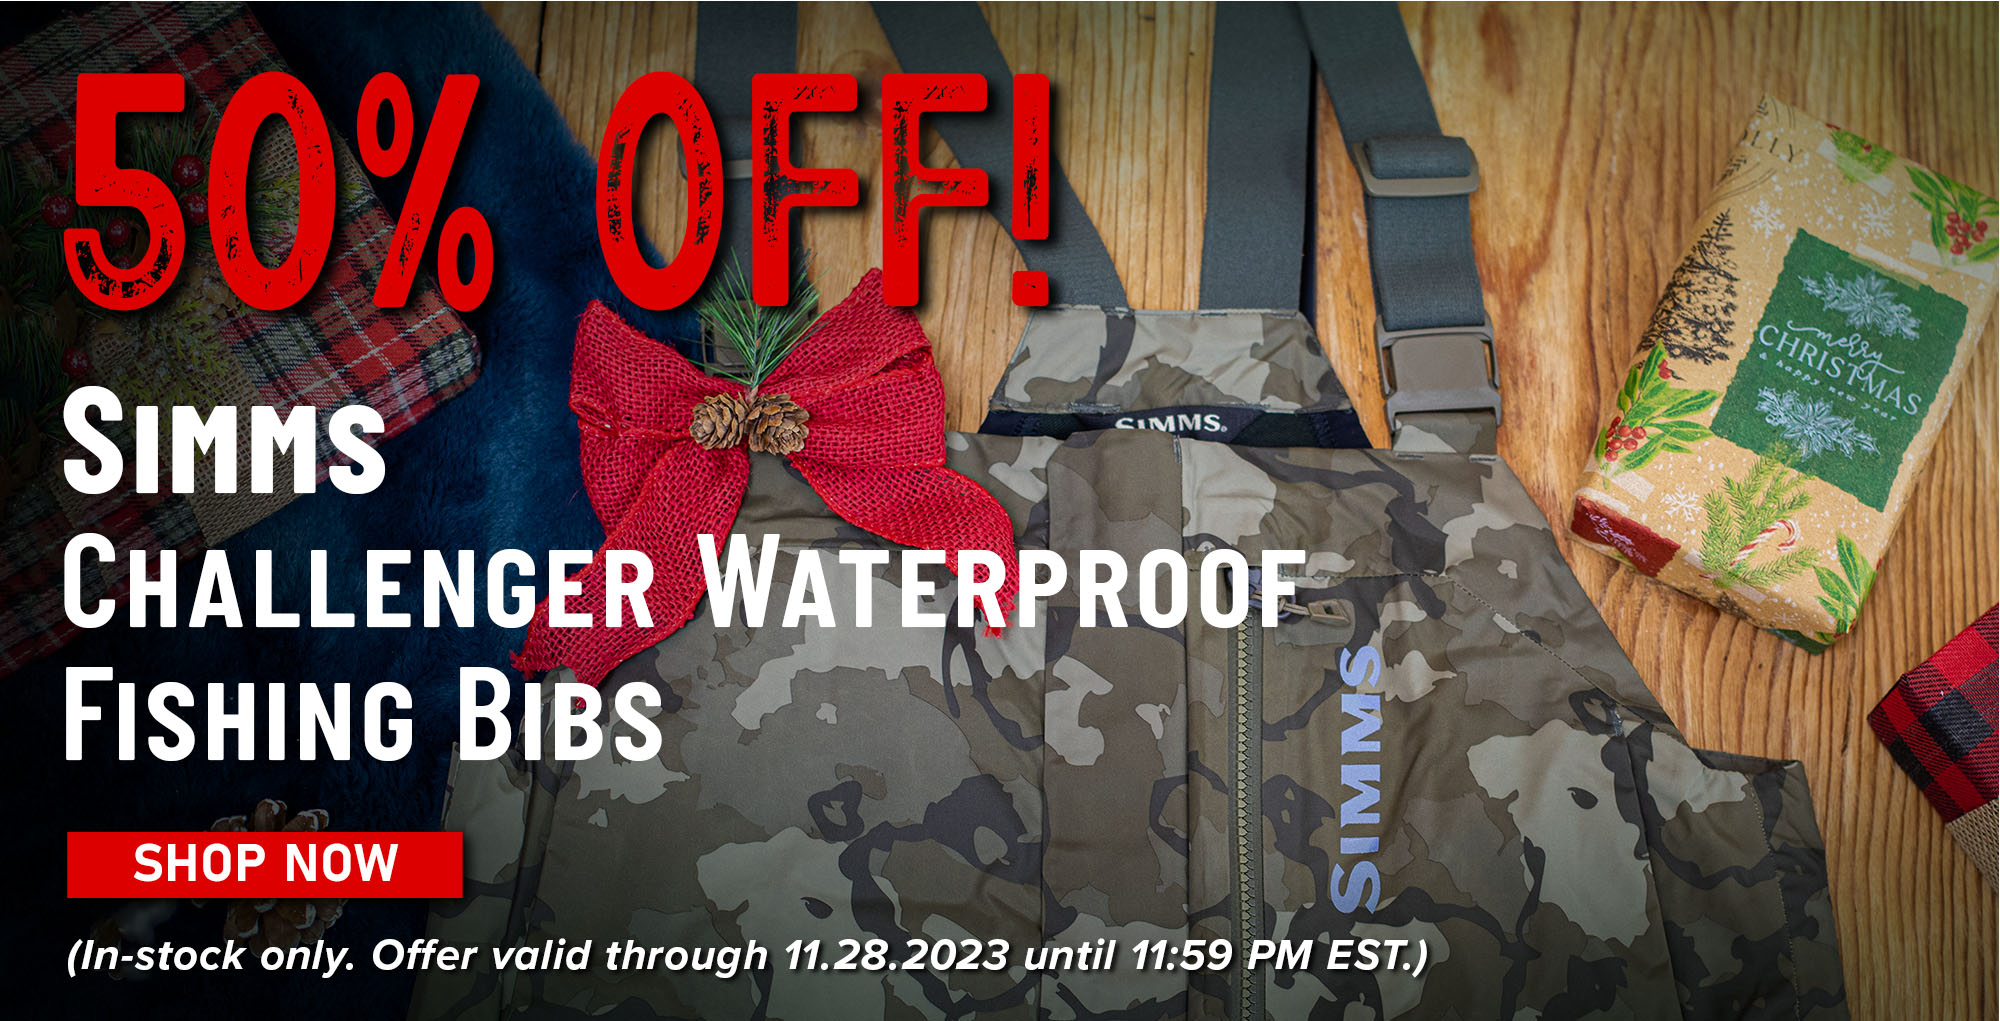 50% Off! Simms Challenger Waterproof Fishing Bibs Shop Now (In-stock only. Offer valid through 11.28.2023 until 11:59 PM EST.)